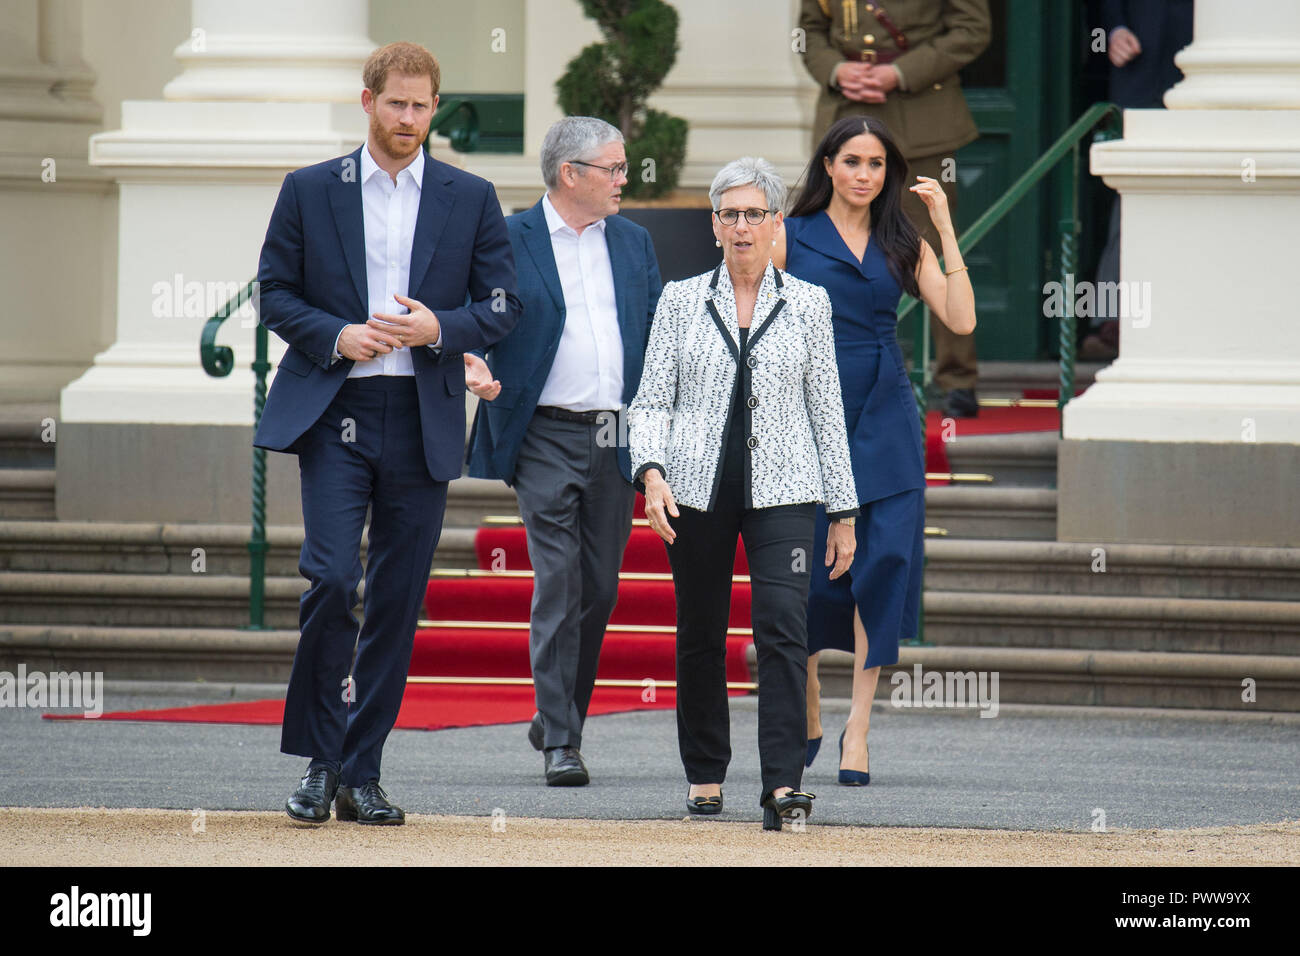 The Duke and Duchess of Sussex with Governor of Victoria Linda Dessau and her husband Anthony Howard at a reception given by the Governor of Victoria, at Government House during their visit to Melbourne, on the third day of the royal couple's visit to Australia. Stock Photo